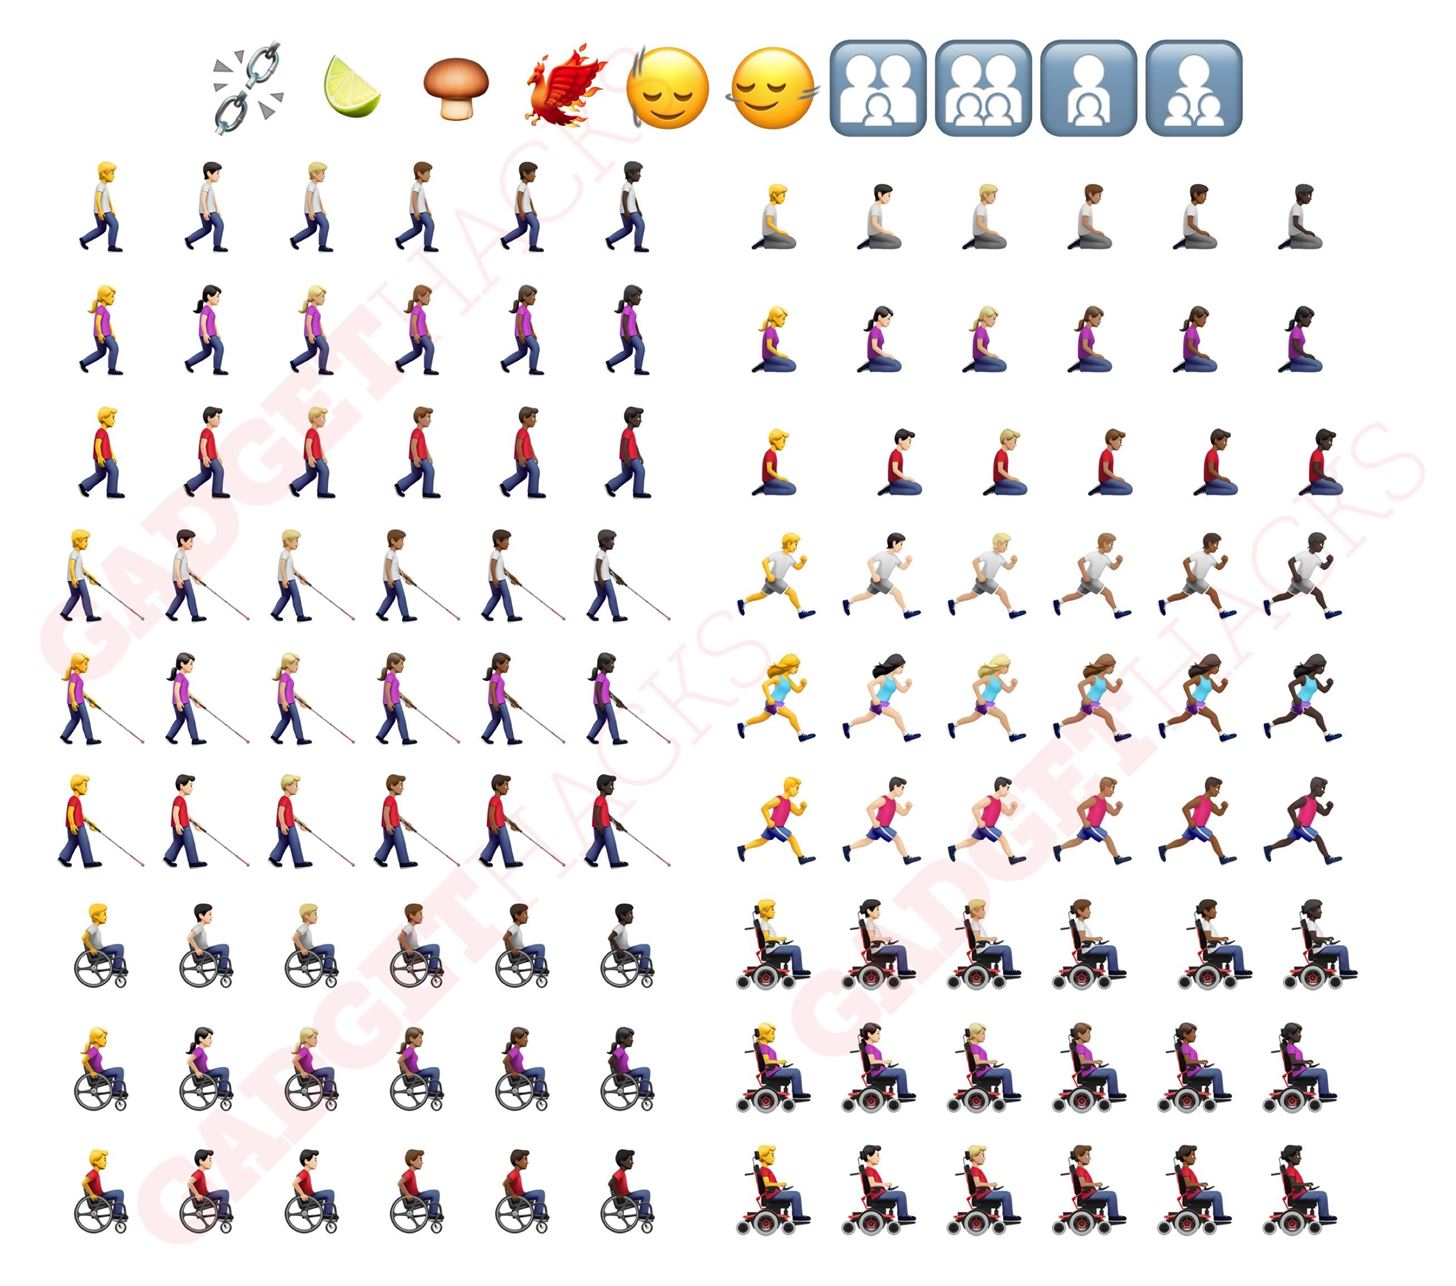 Your iPhone Just Got 118 More Emoji — Here Are All the New Characters and Variations